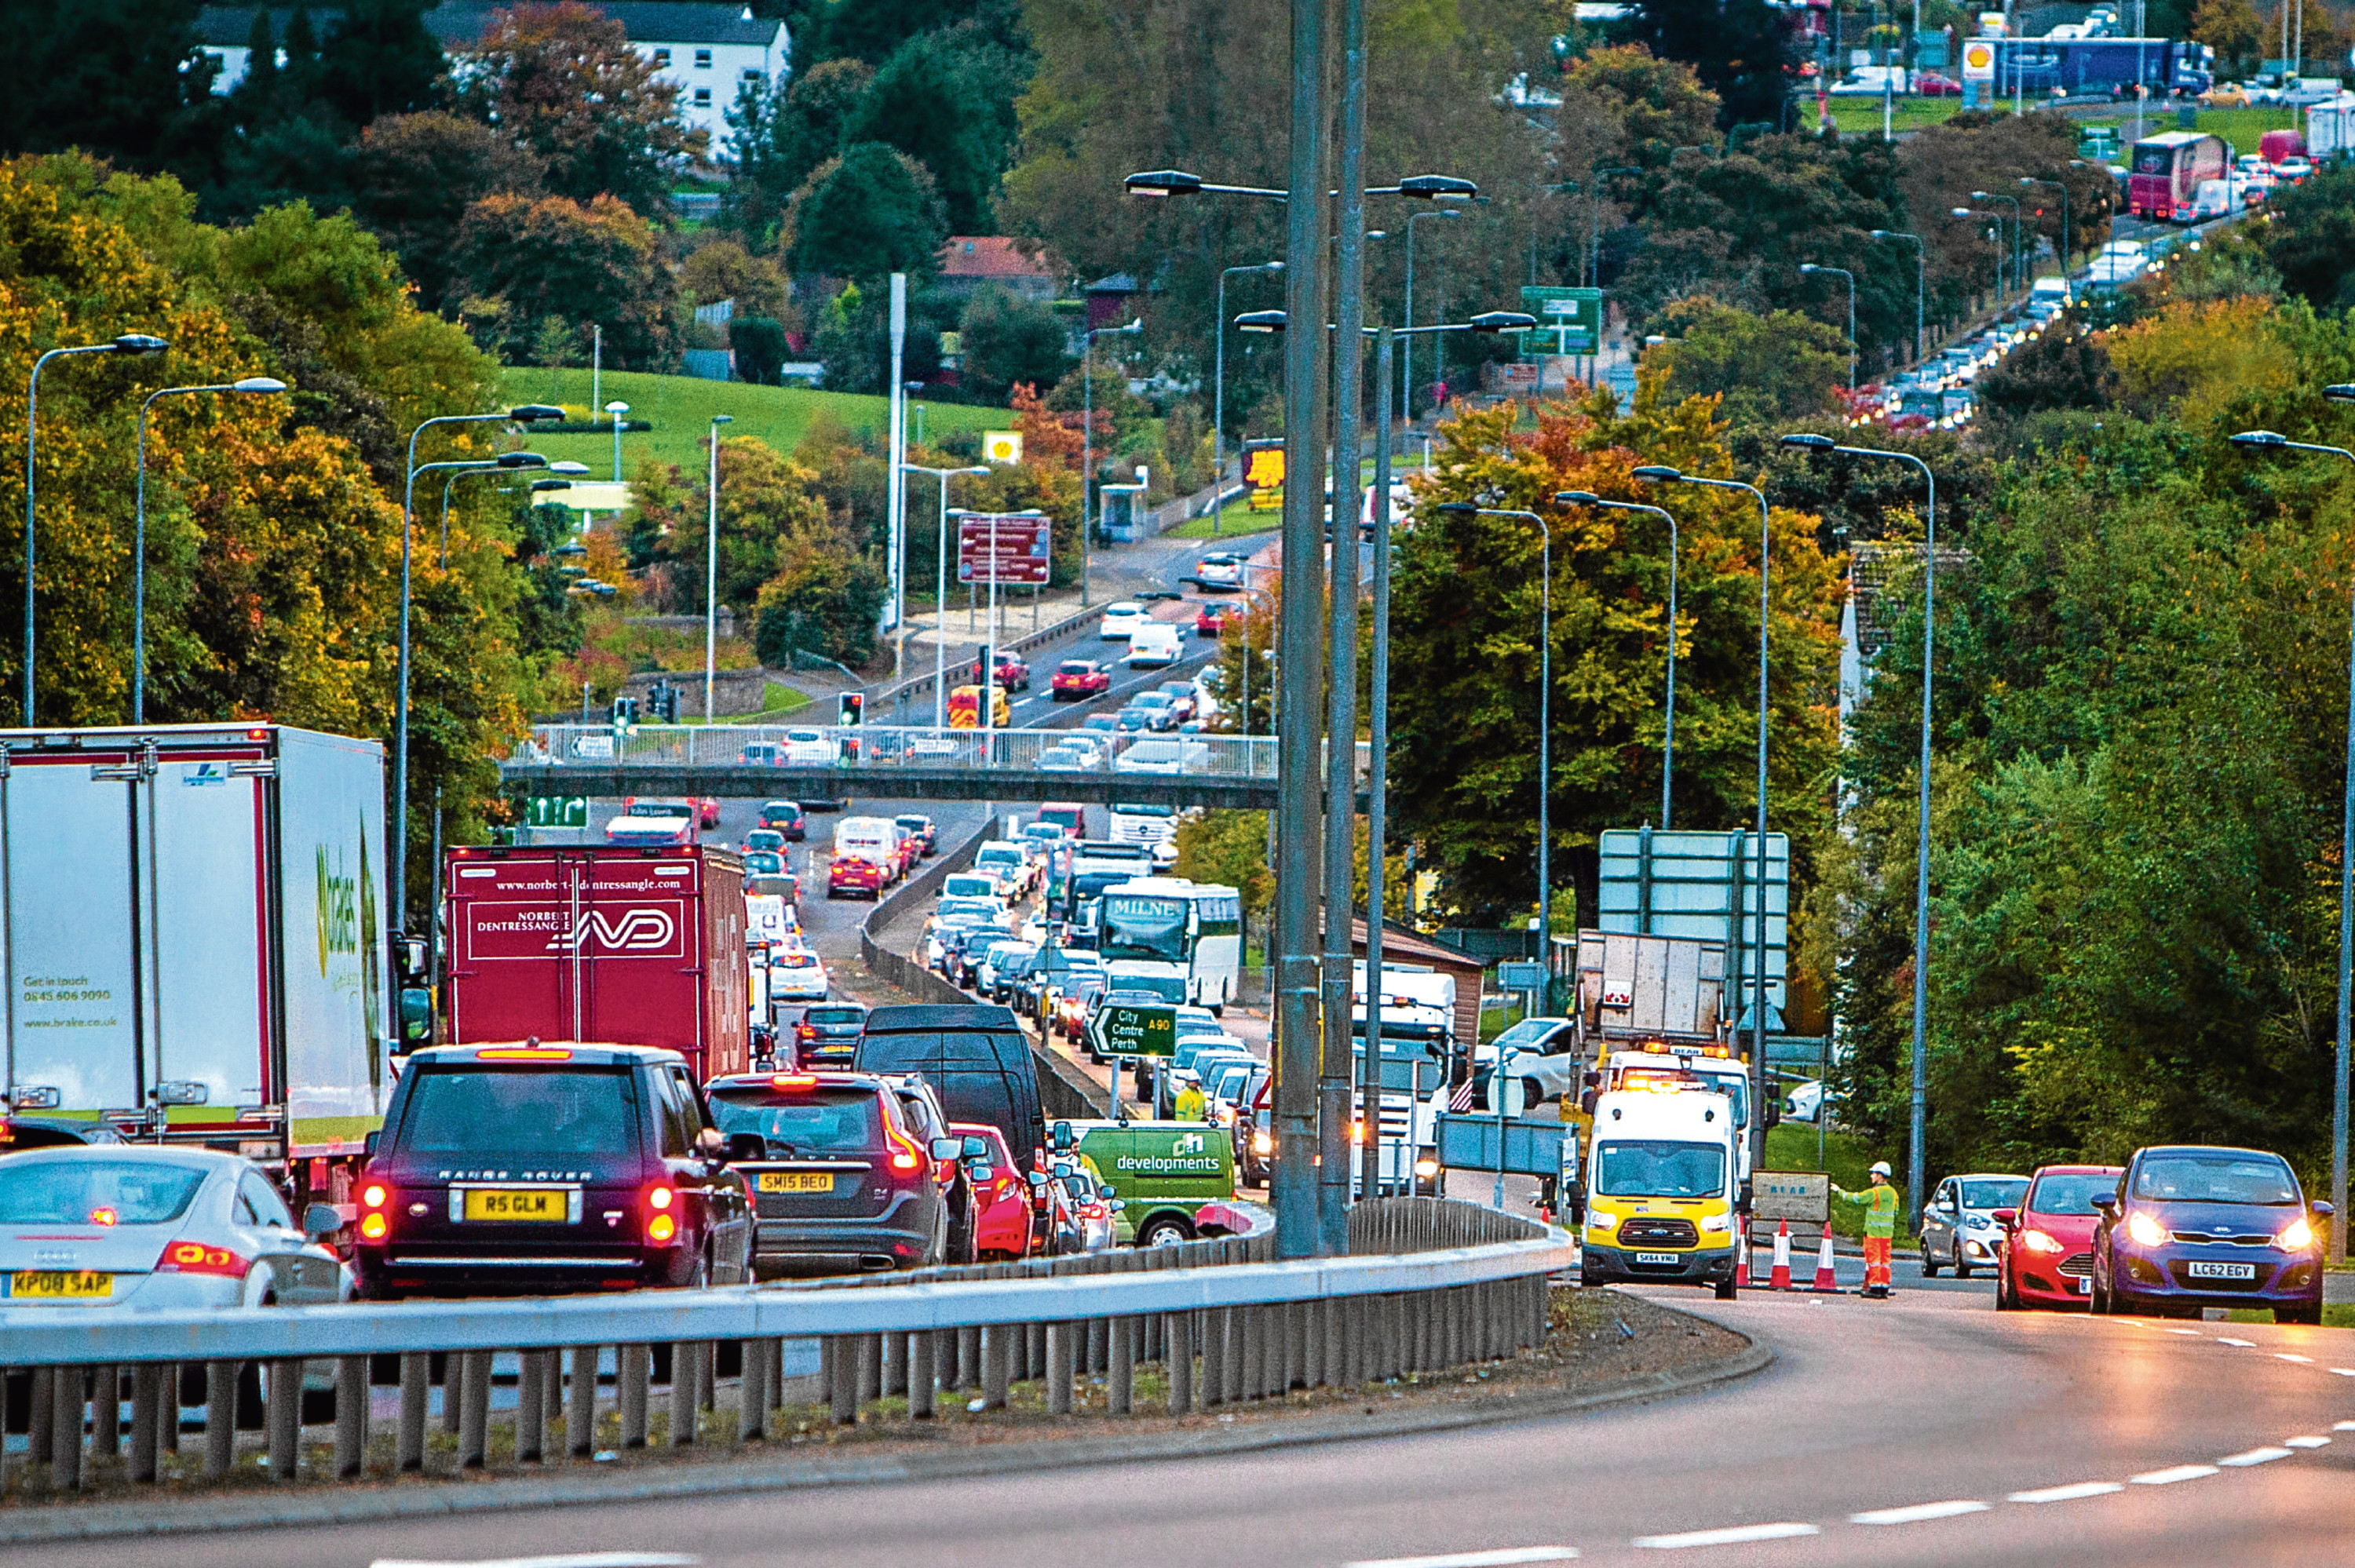 Queuing traffic in both directions at the Fintry Drive junction with Forfar Road, Dundee.